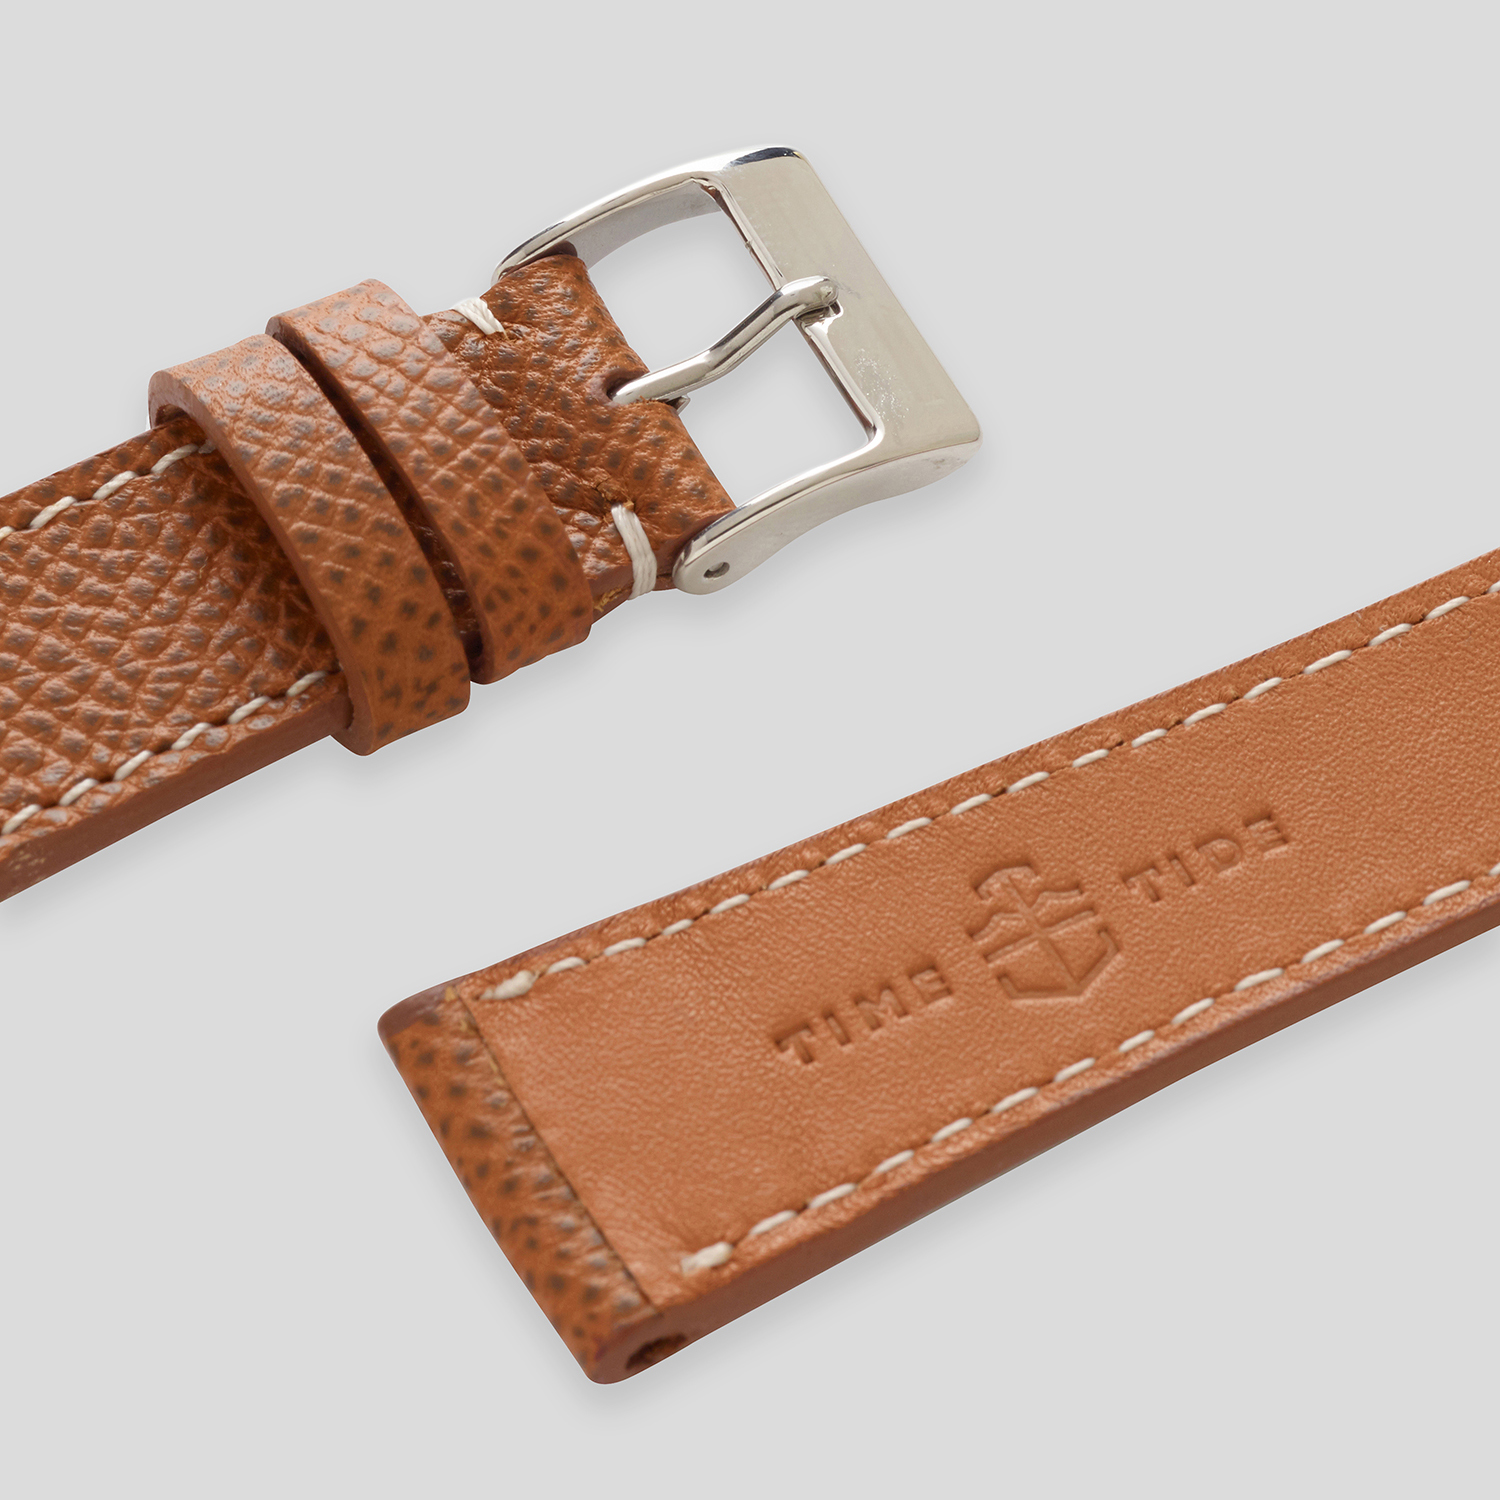 light brown leather watch band